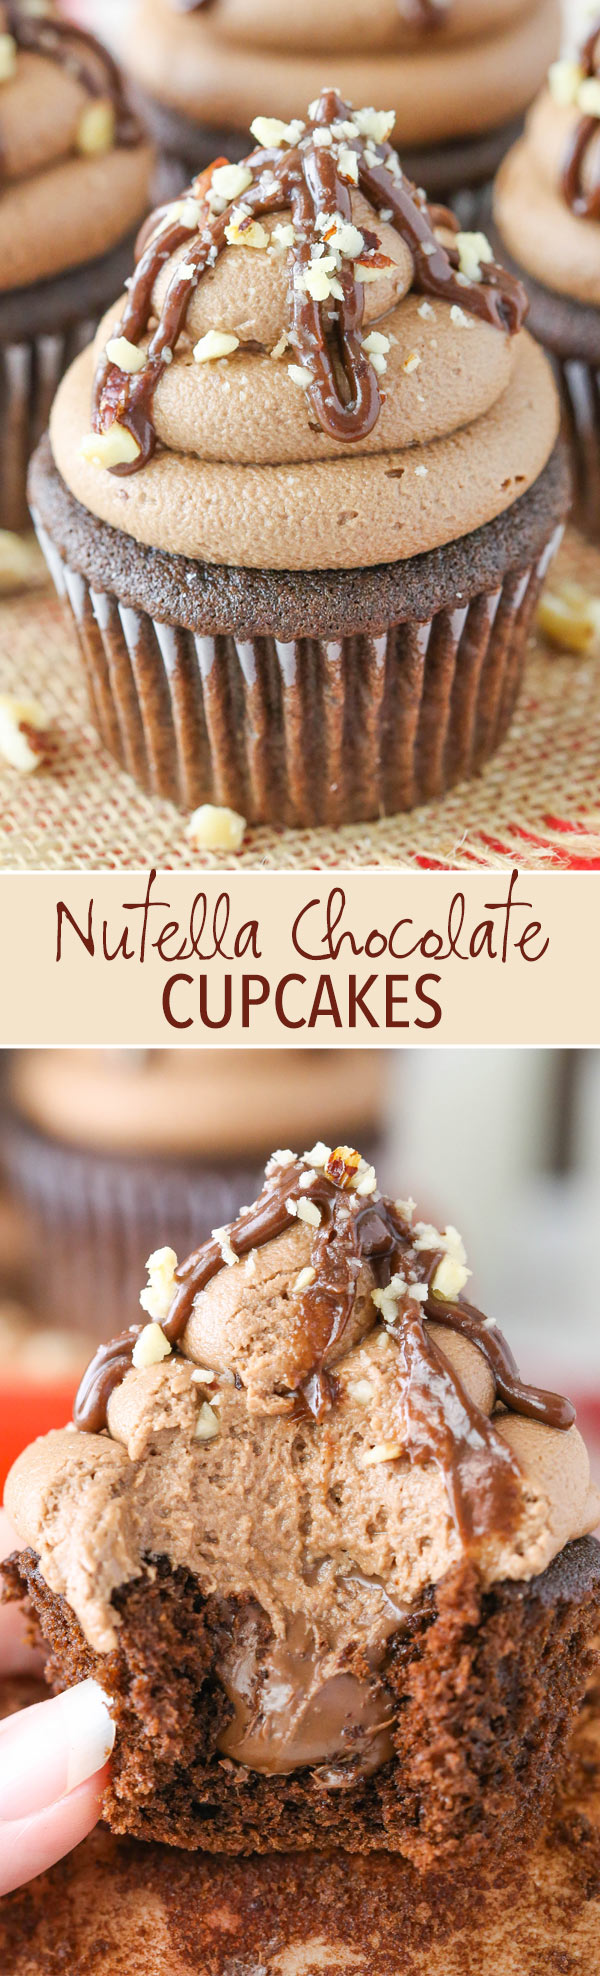 Nutella Chocolate Cupcakes - soft, moist chocolate cupcakes filled with Nutella and topped with Nutella Frosting!